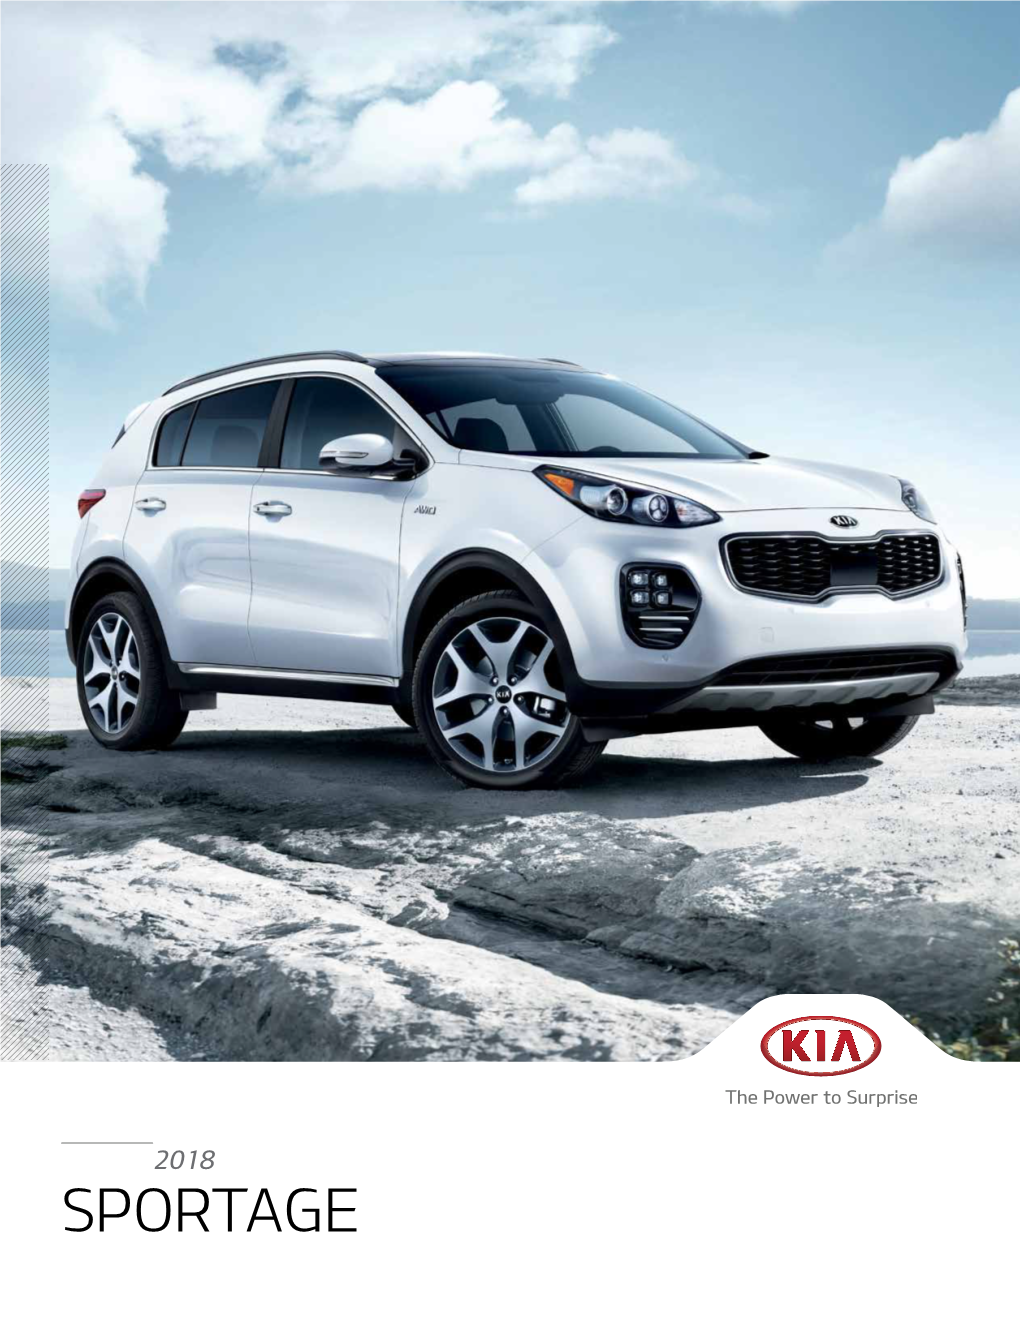 Sportage Made for [ Active Lifestyles ]